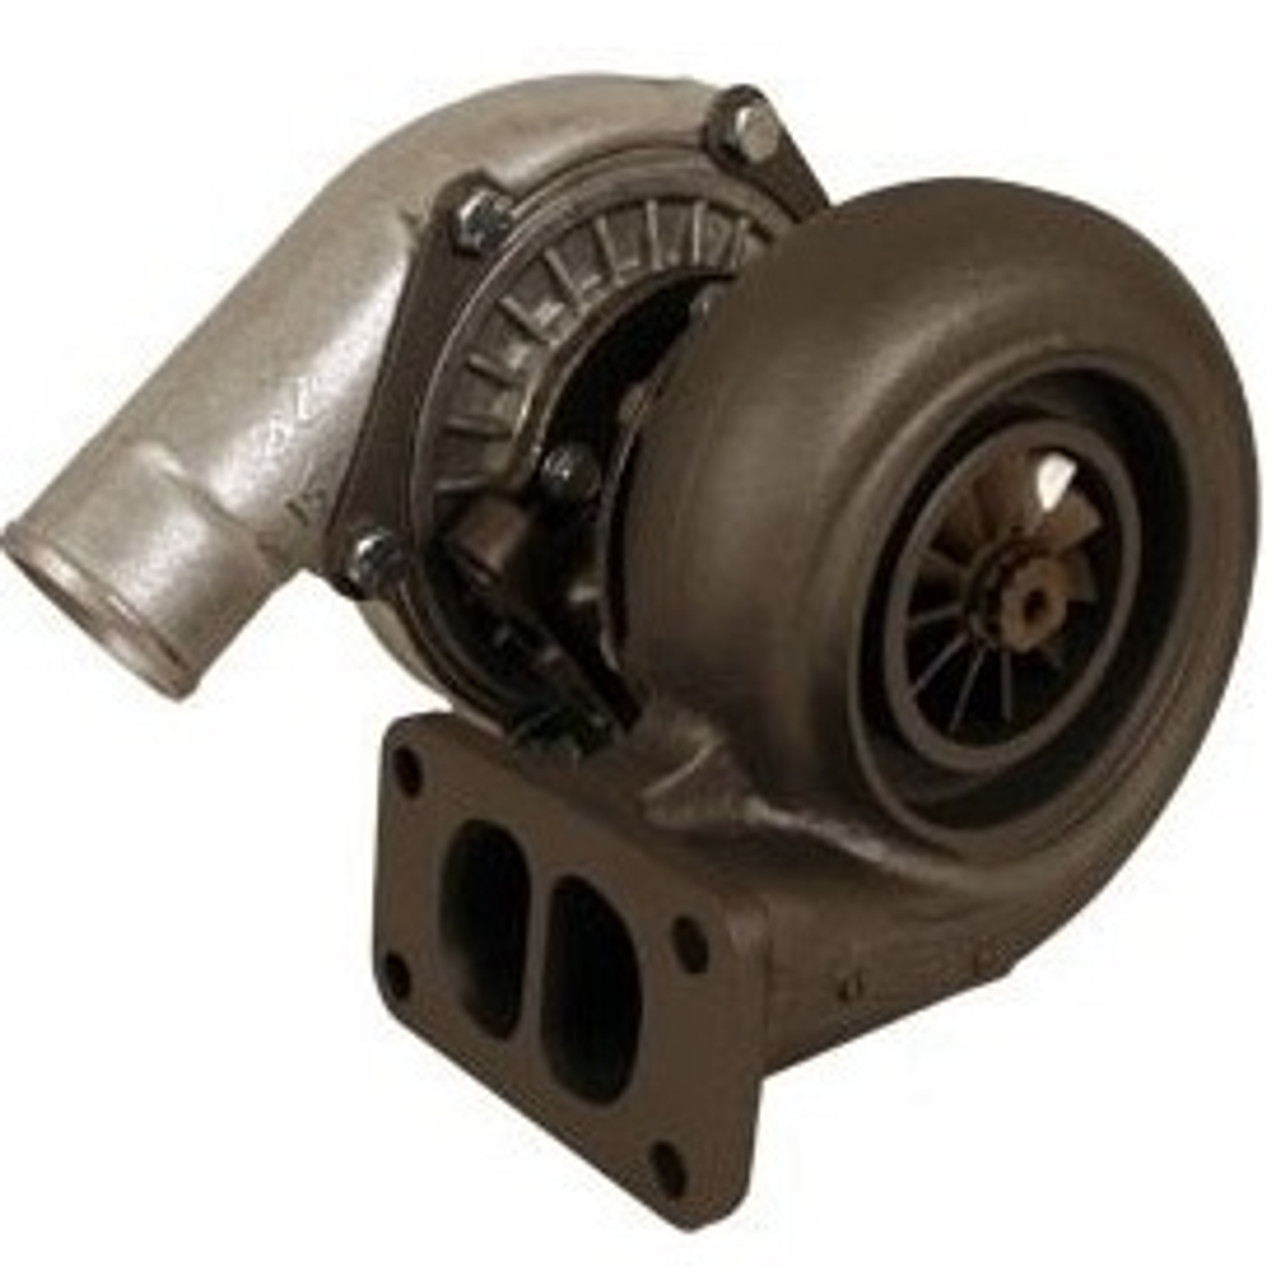 Deere Turbo Charger